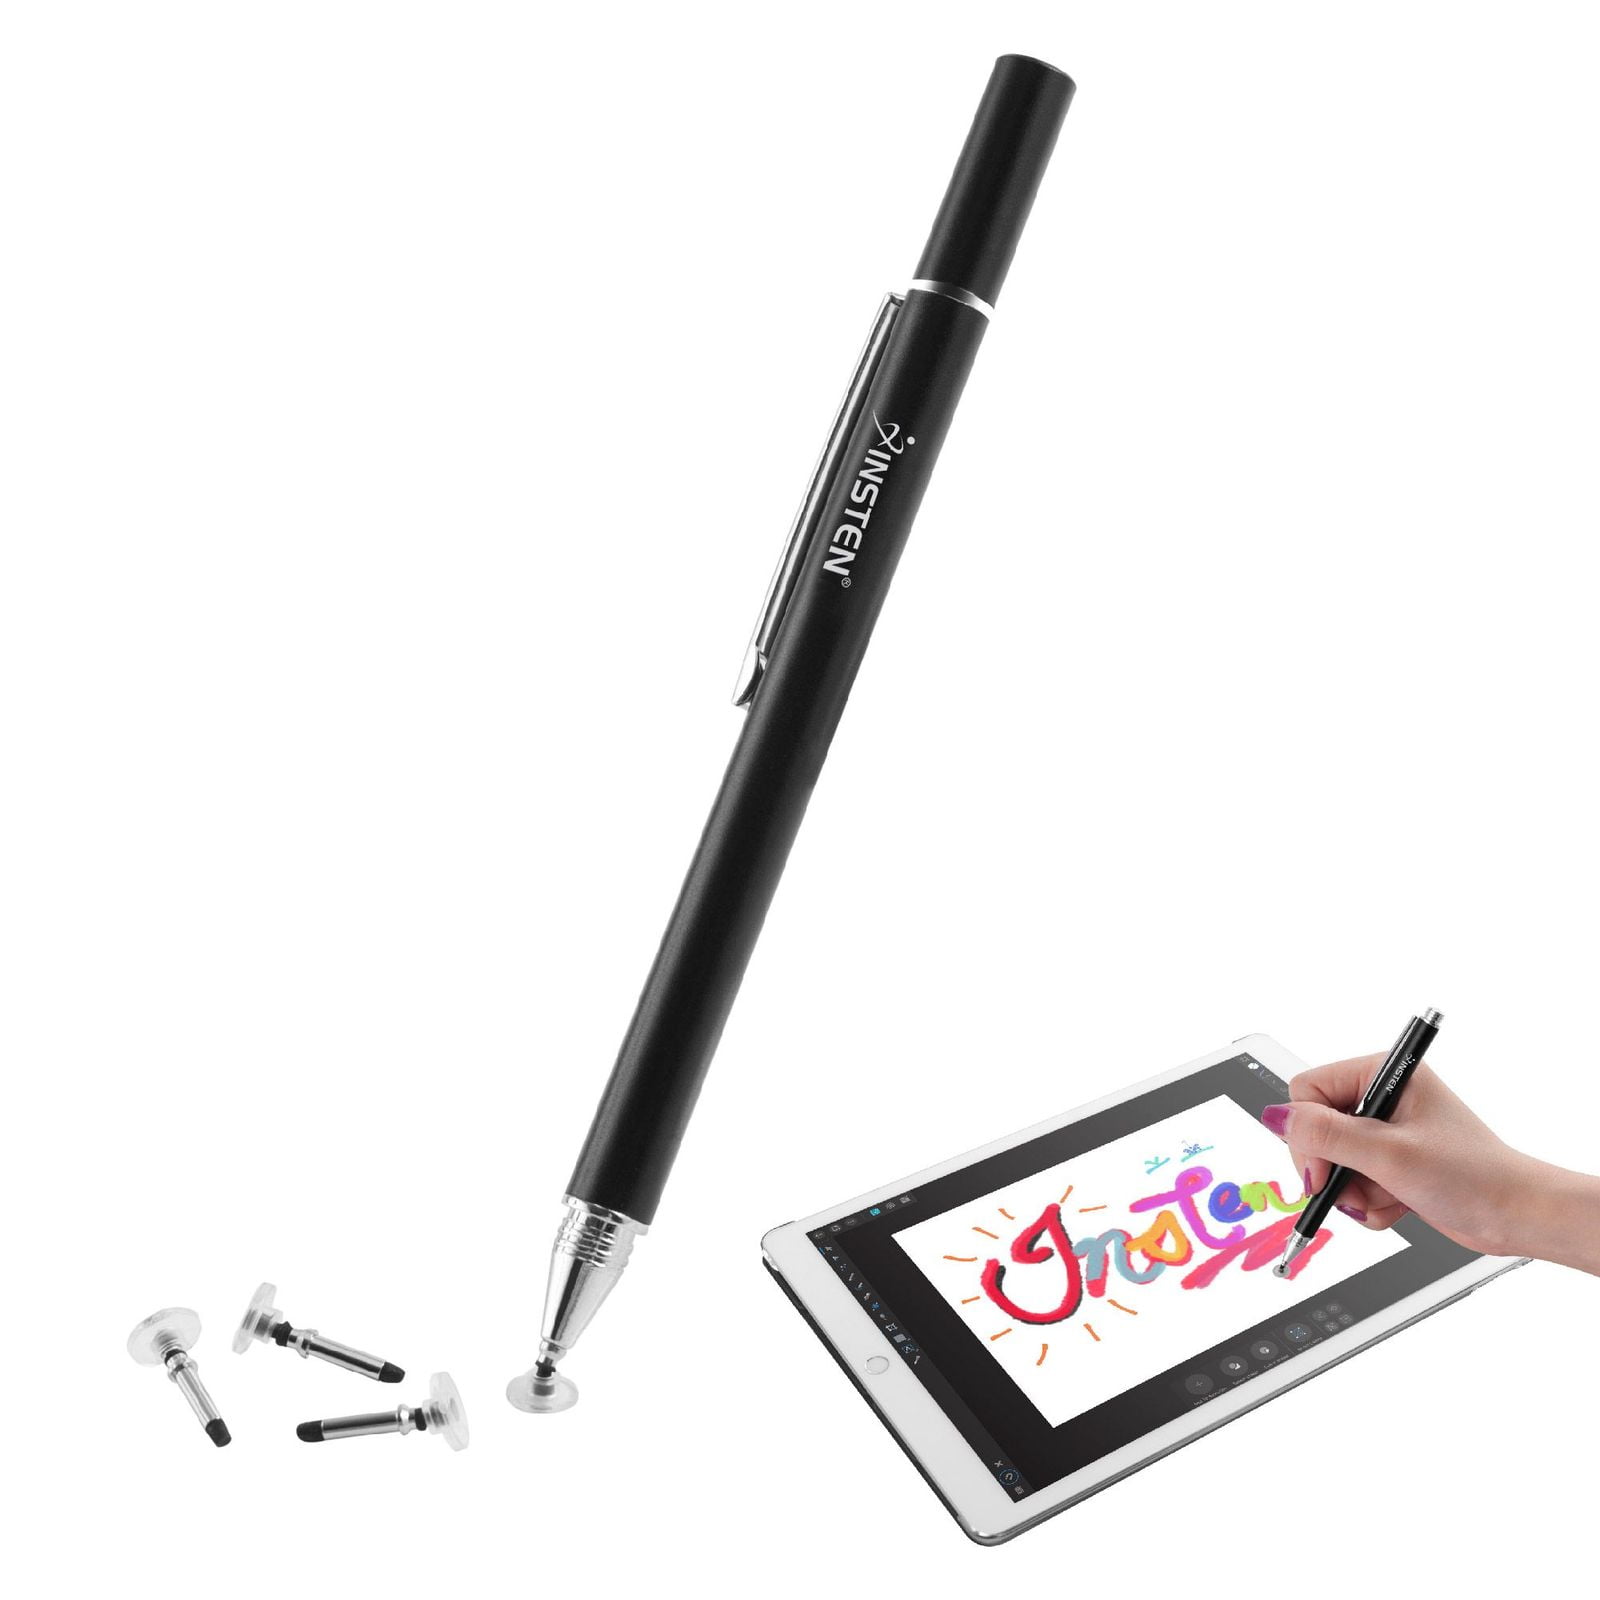 2pcs Metal Universal Pen Stylus Touch Screen For Cell Phone Tablet iPad Samsung 